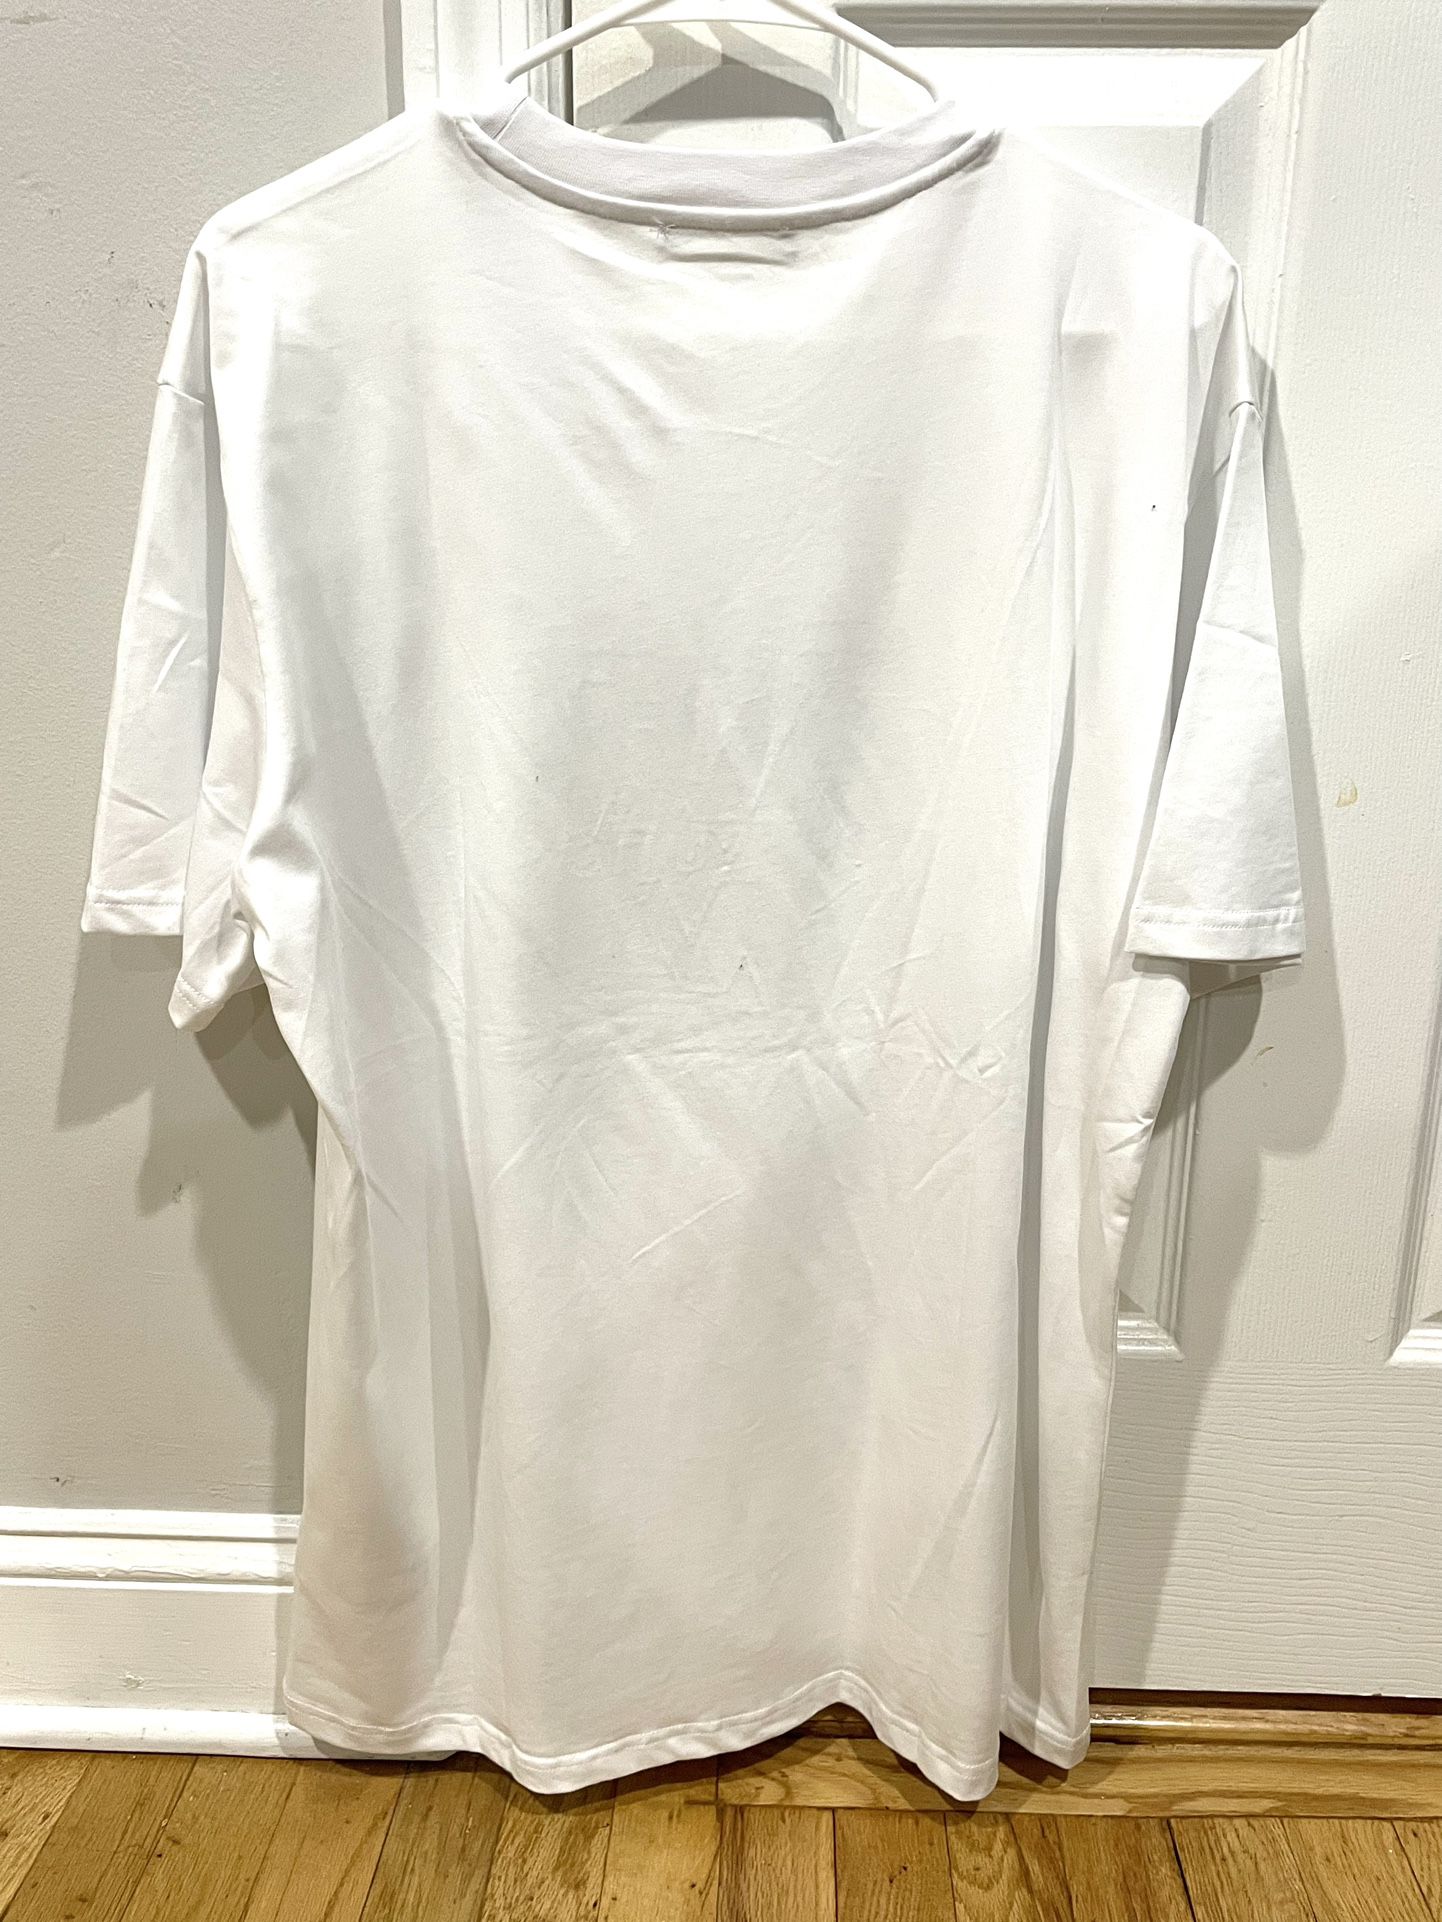 Louis Vuitton White Shirt Medium for Sale in Queens, NY - OfferUp